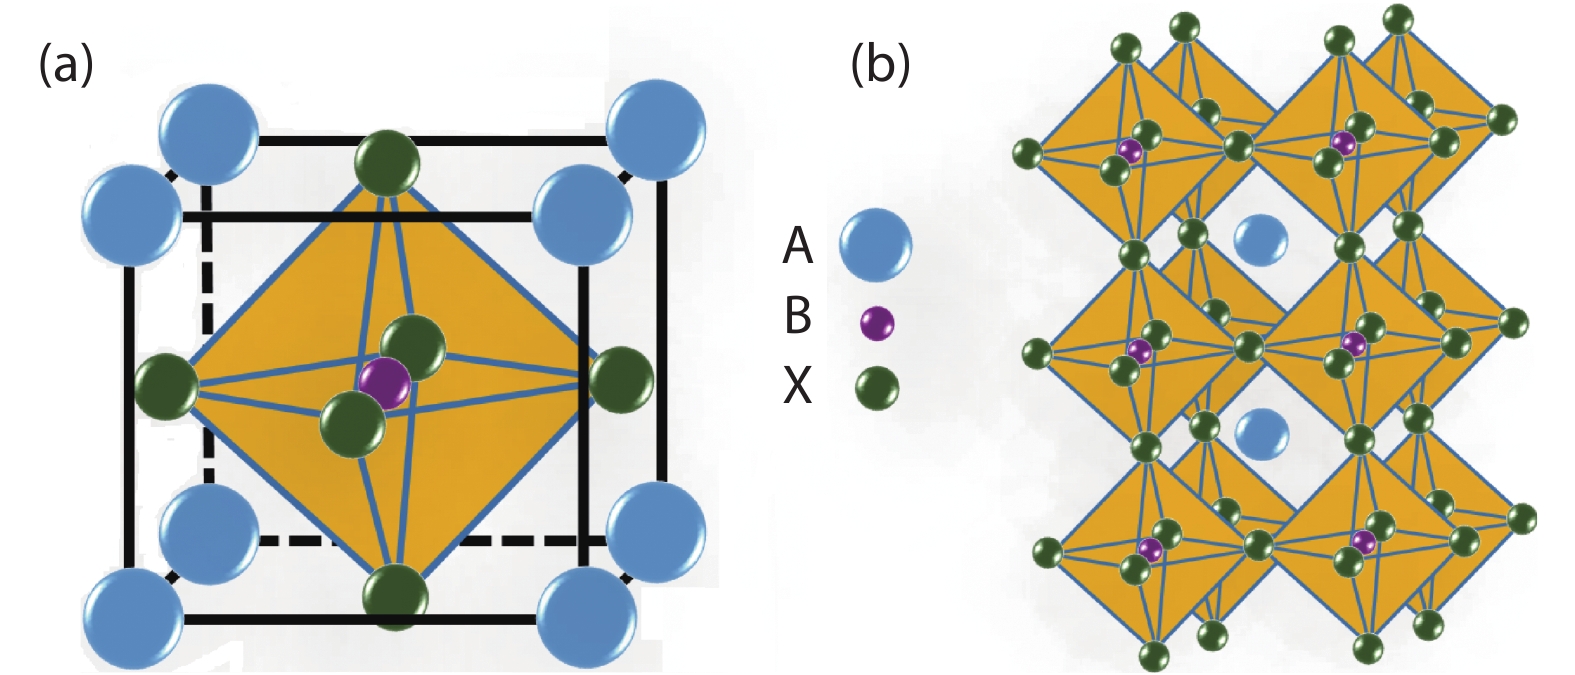 (Color online) (a) Schematic structure of cubic ABX3 perovskite unit cell, and (b) the extended tridimensional structure of perovskites formed by the corner-linked octahedral.